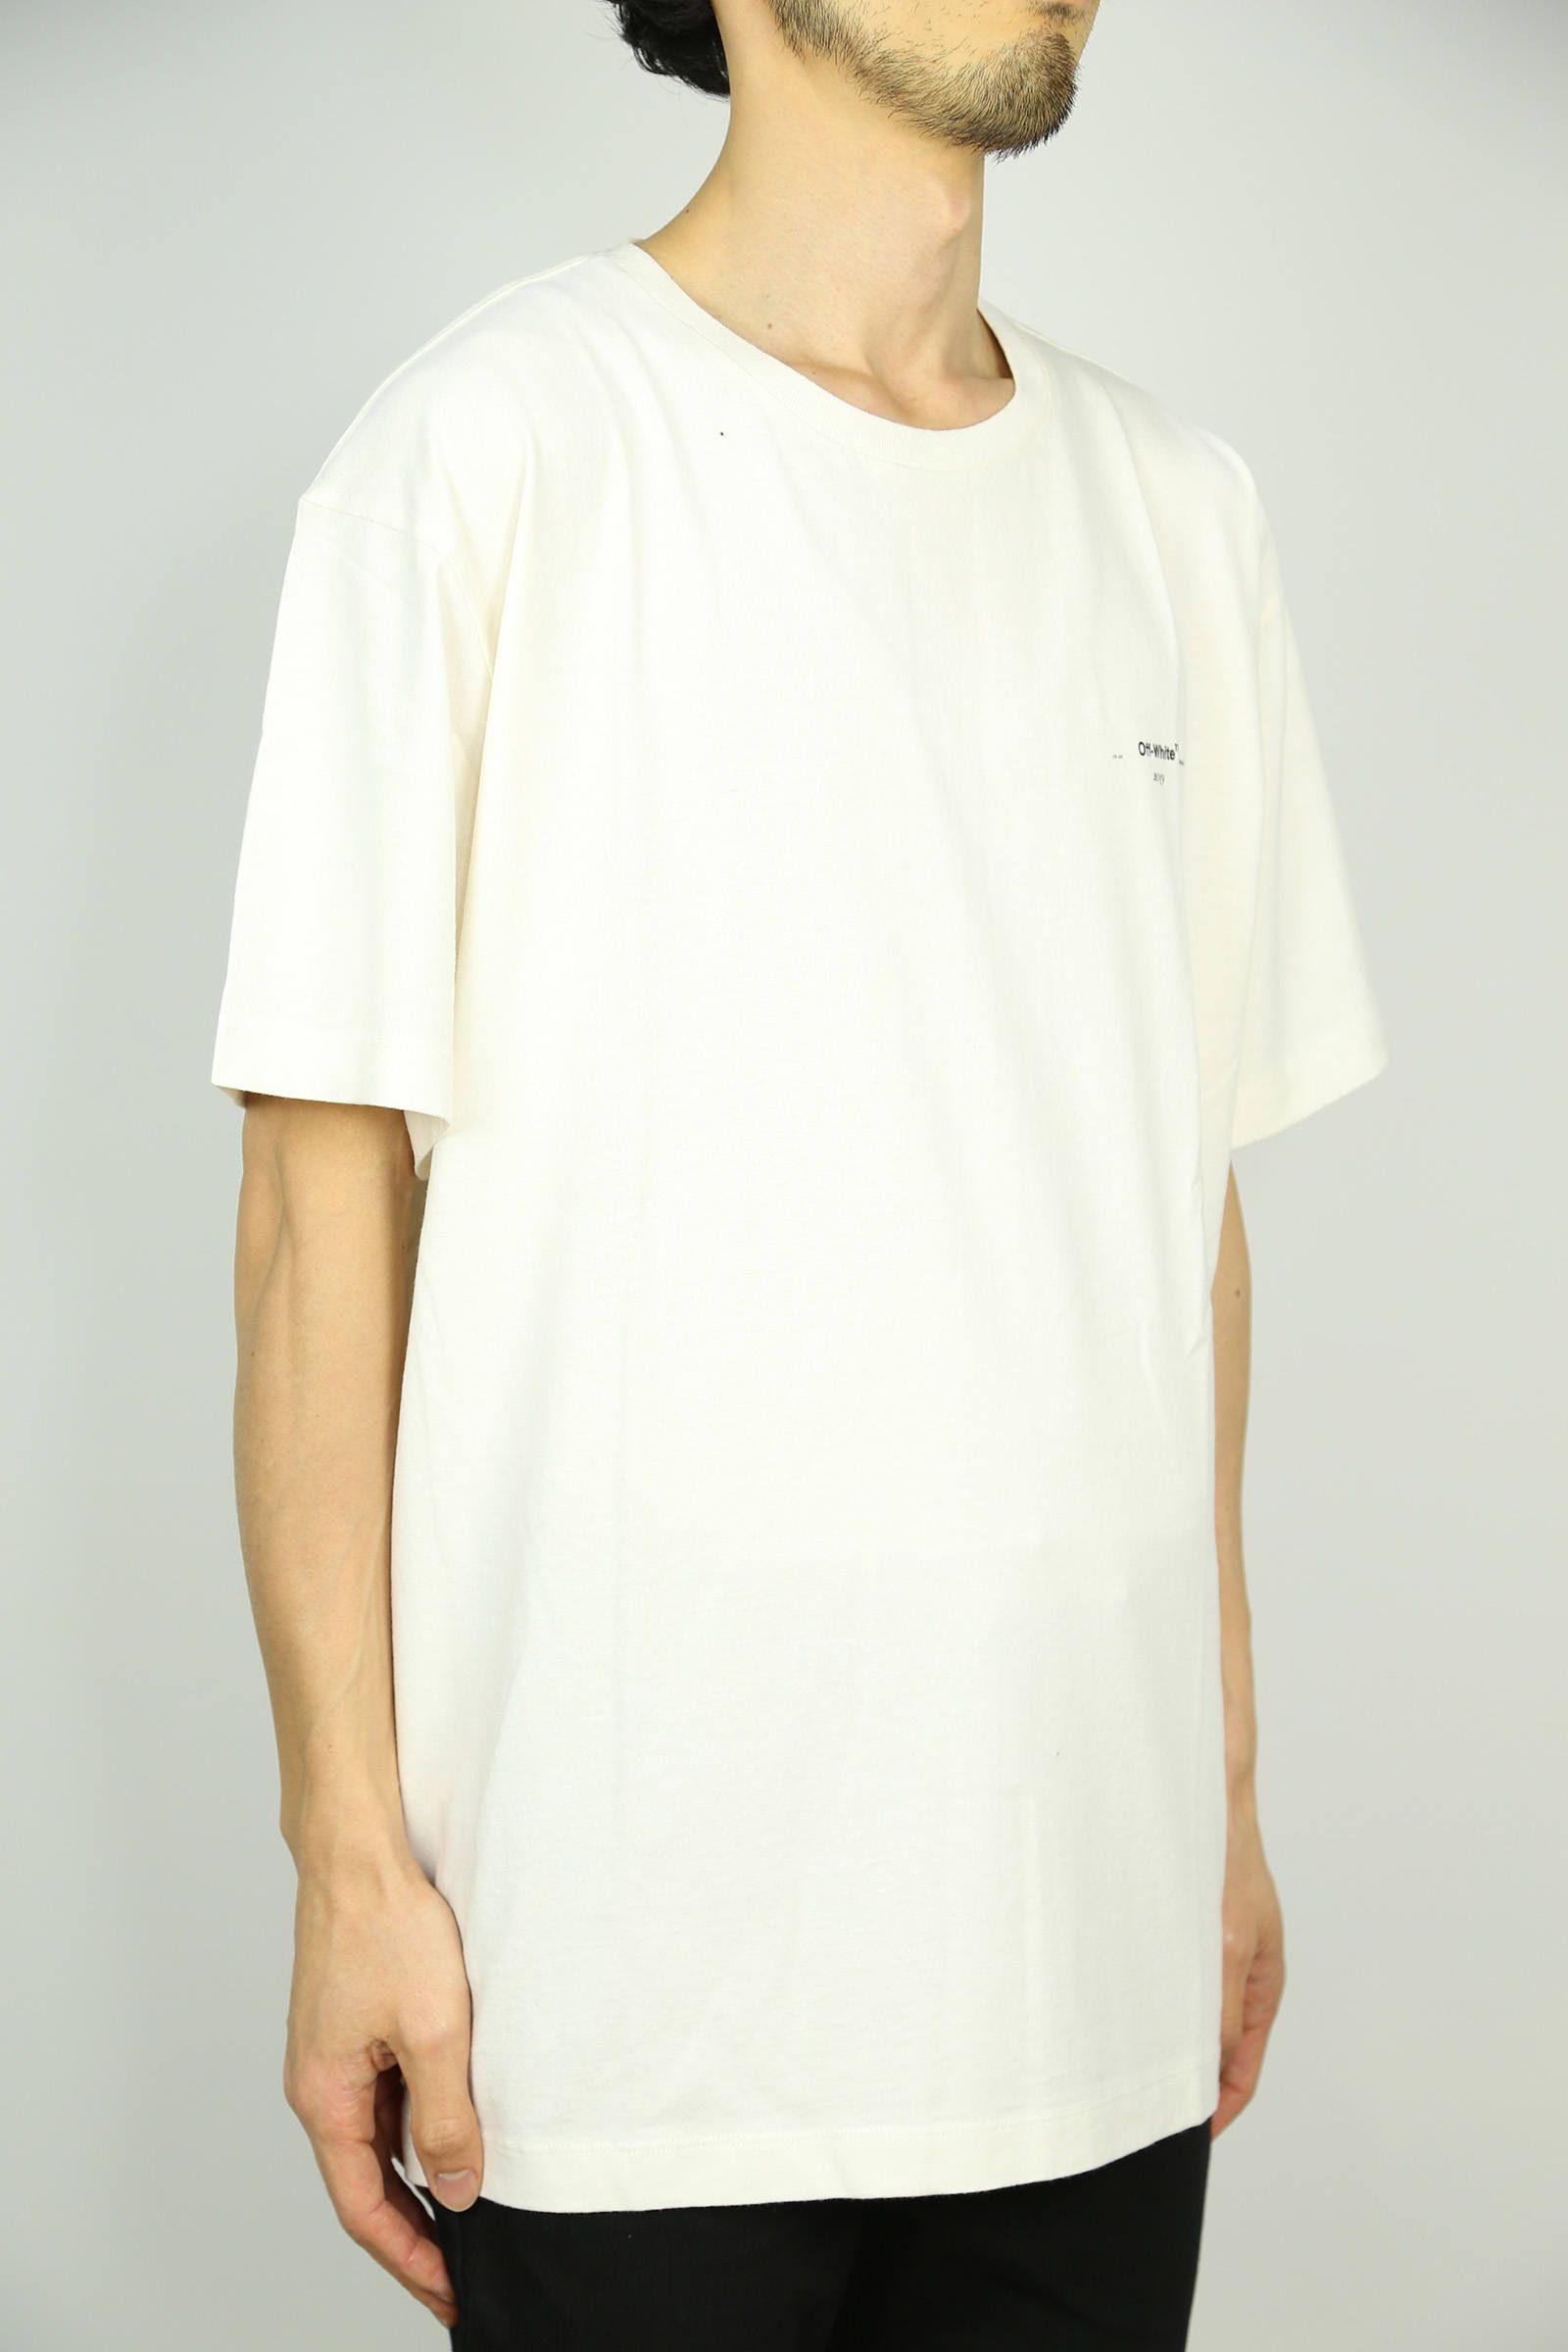 OFF-WHITE - COLORED ARROWS S/S OVER TEE / ホワイト | Tempt